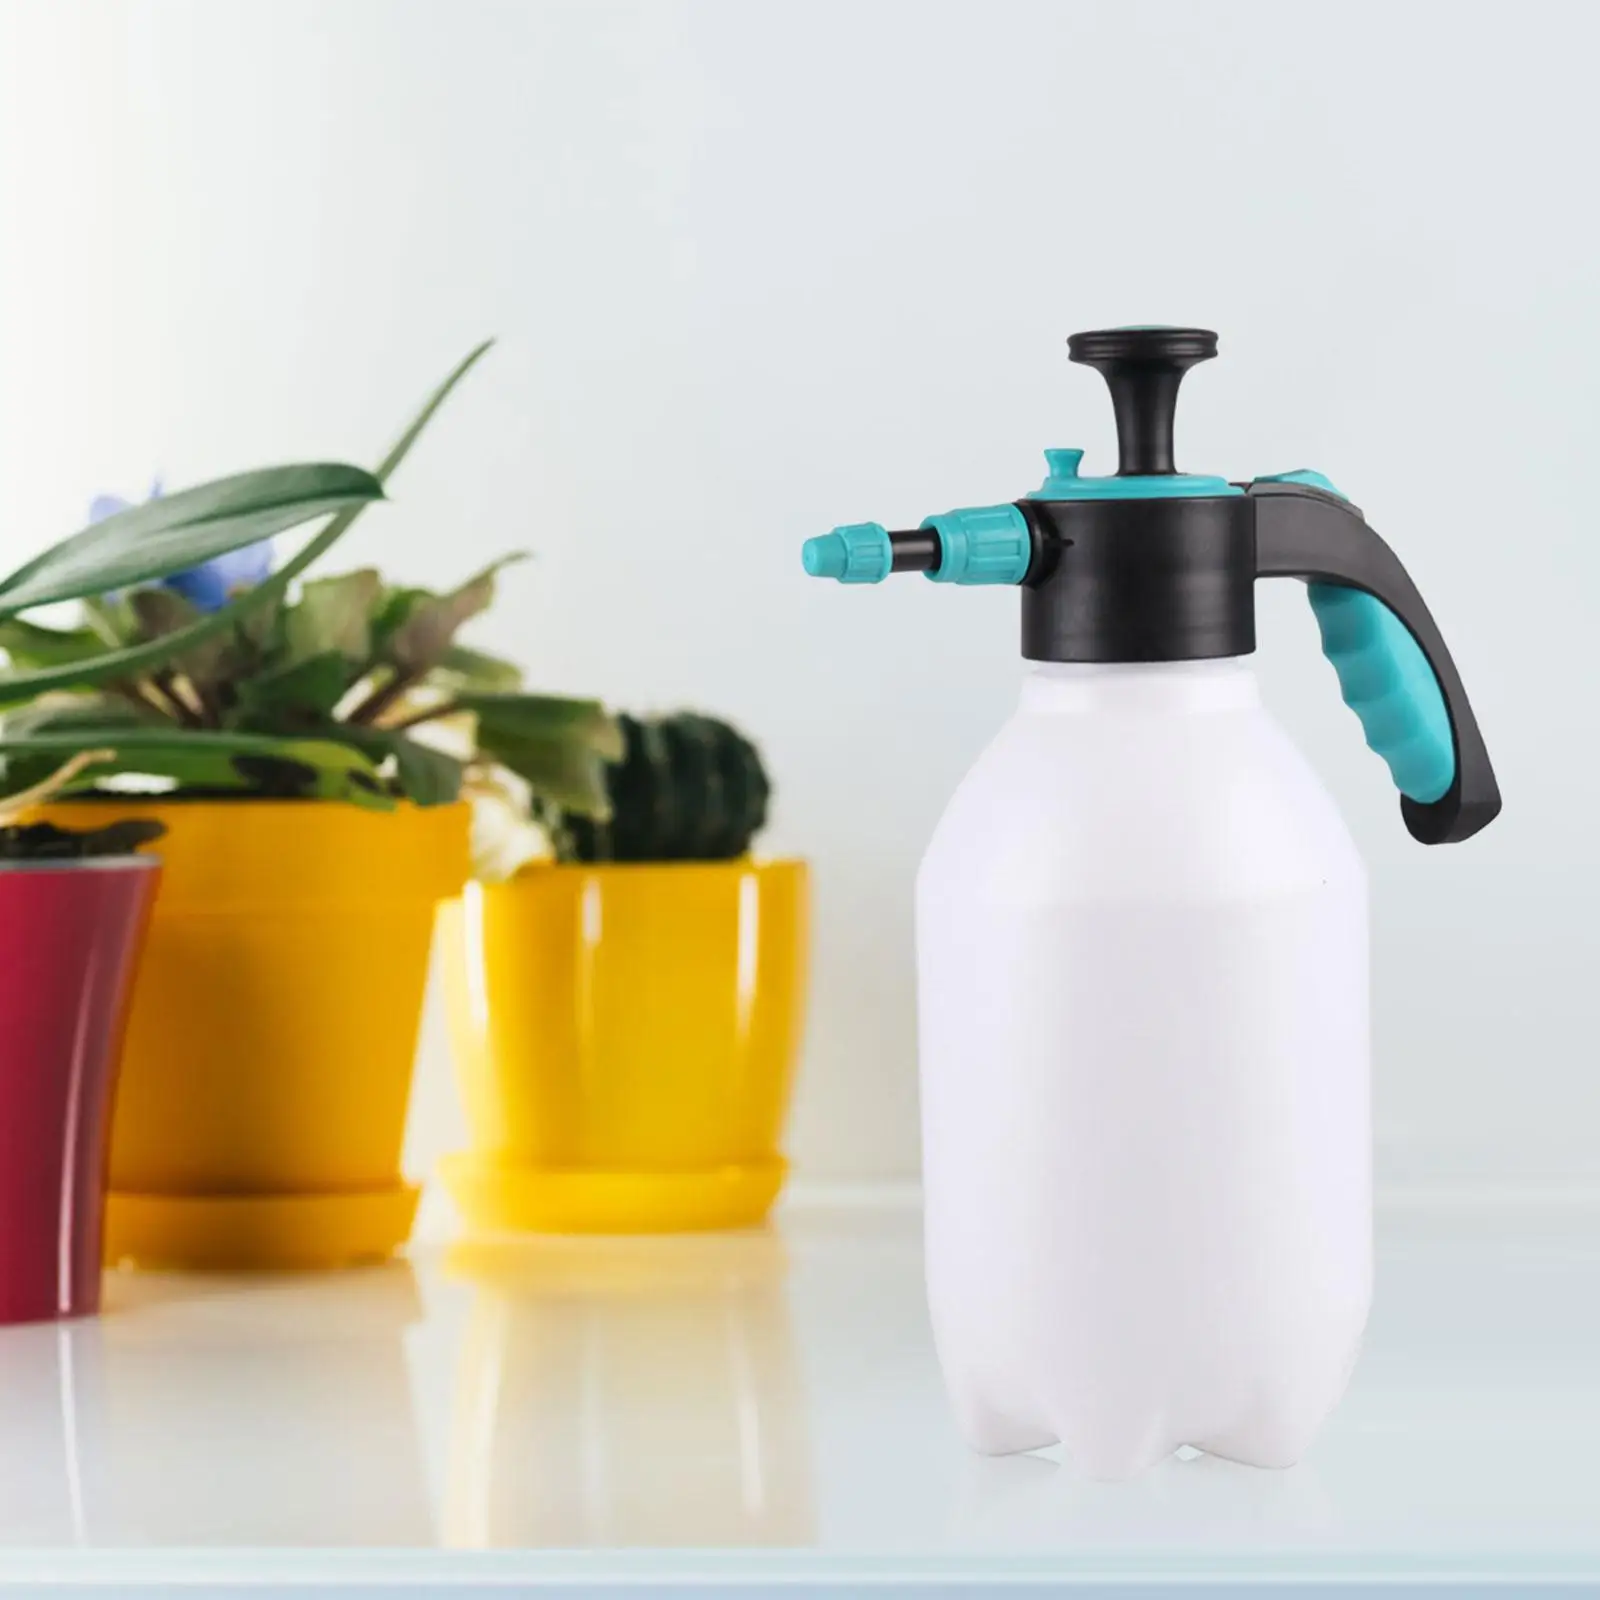 

Handheld Air Pressure Watering Can Hand Pressed Sprayer Portable Large Capacity Hand Tool 2L Spray Bottle for Watering Plants